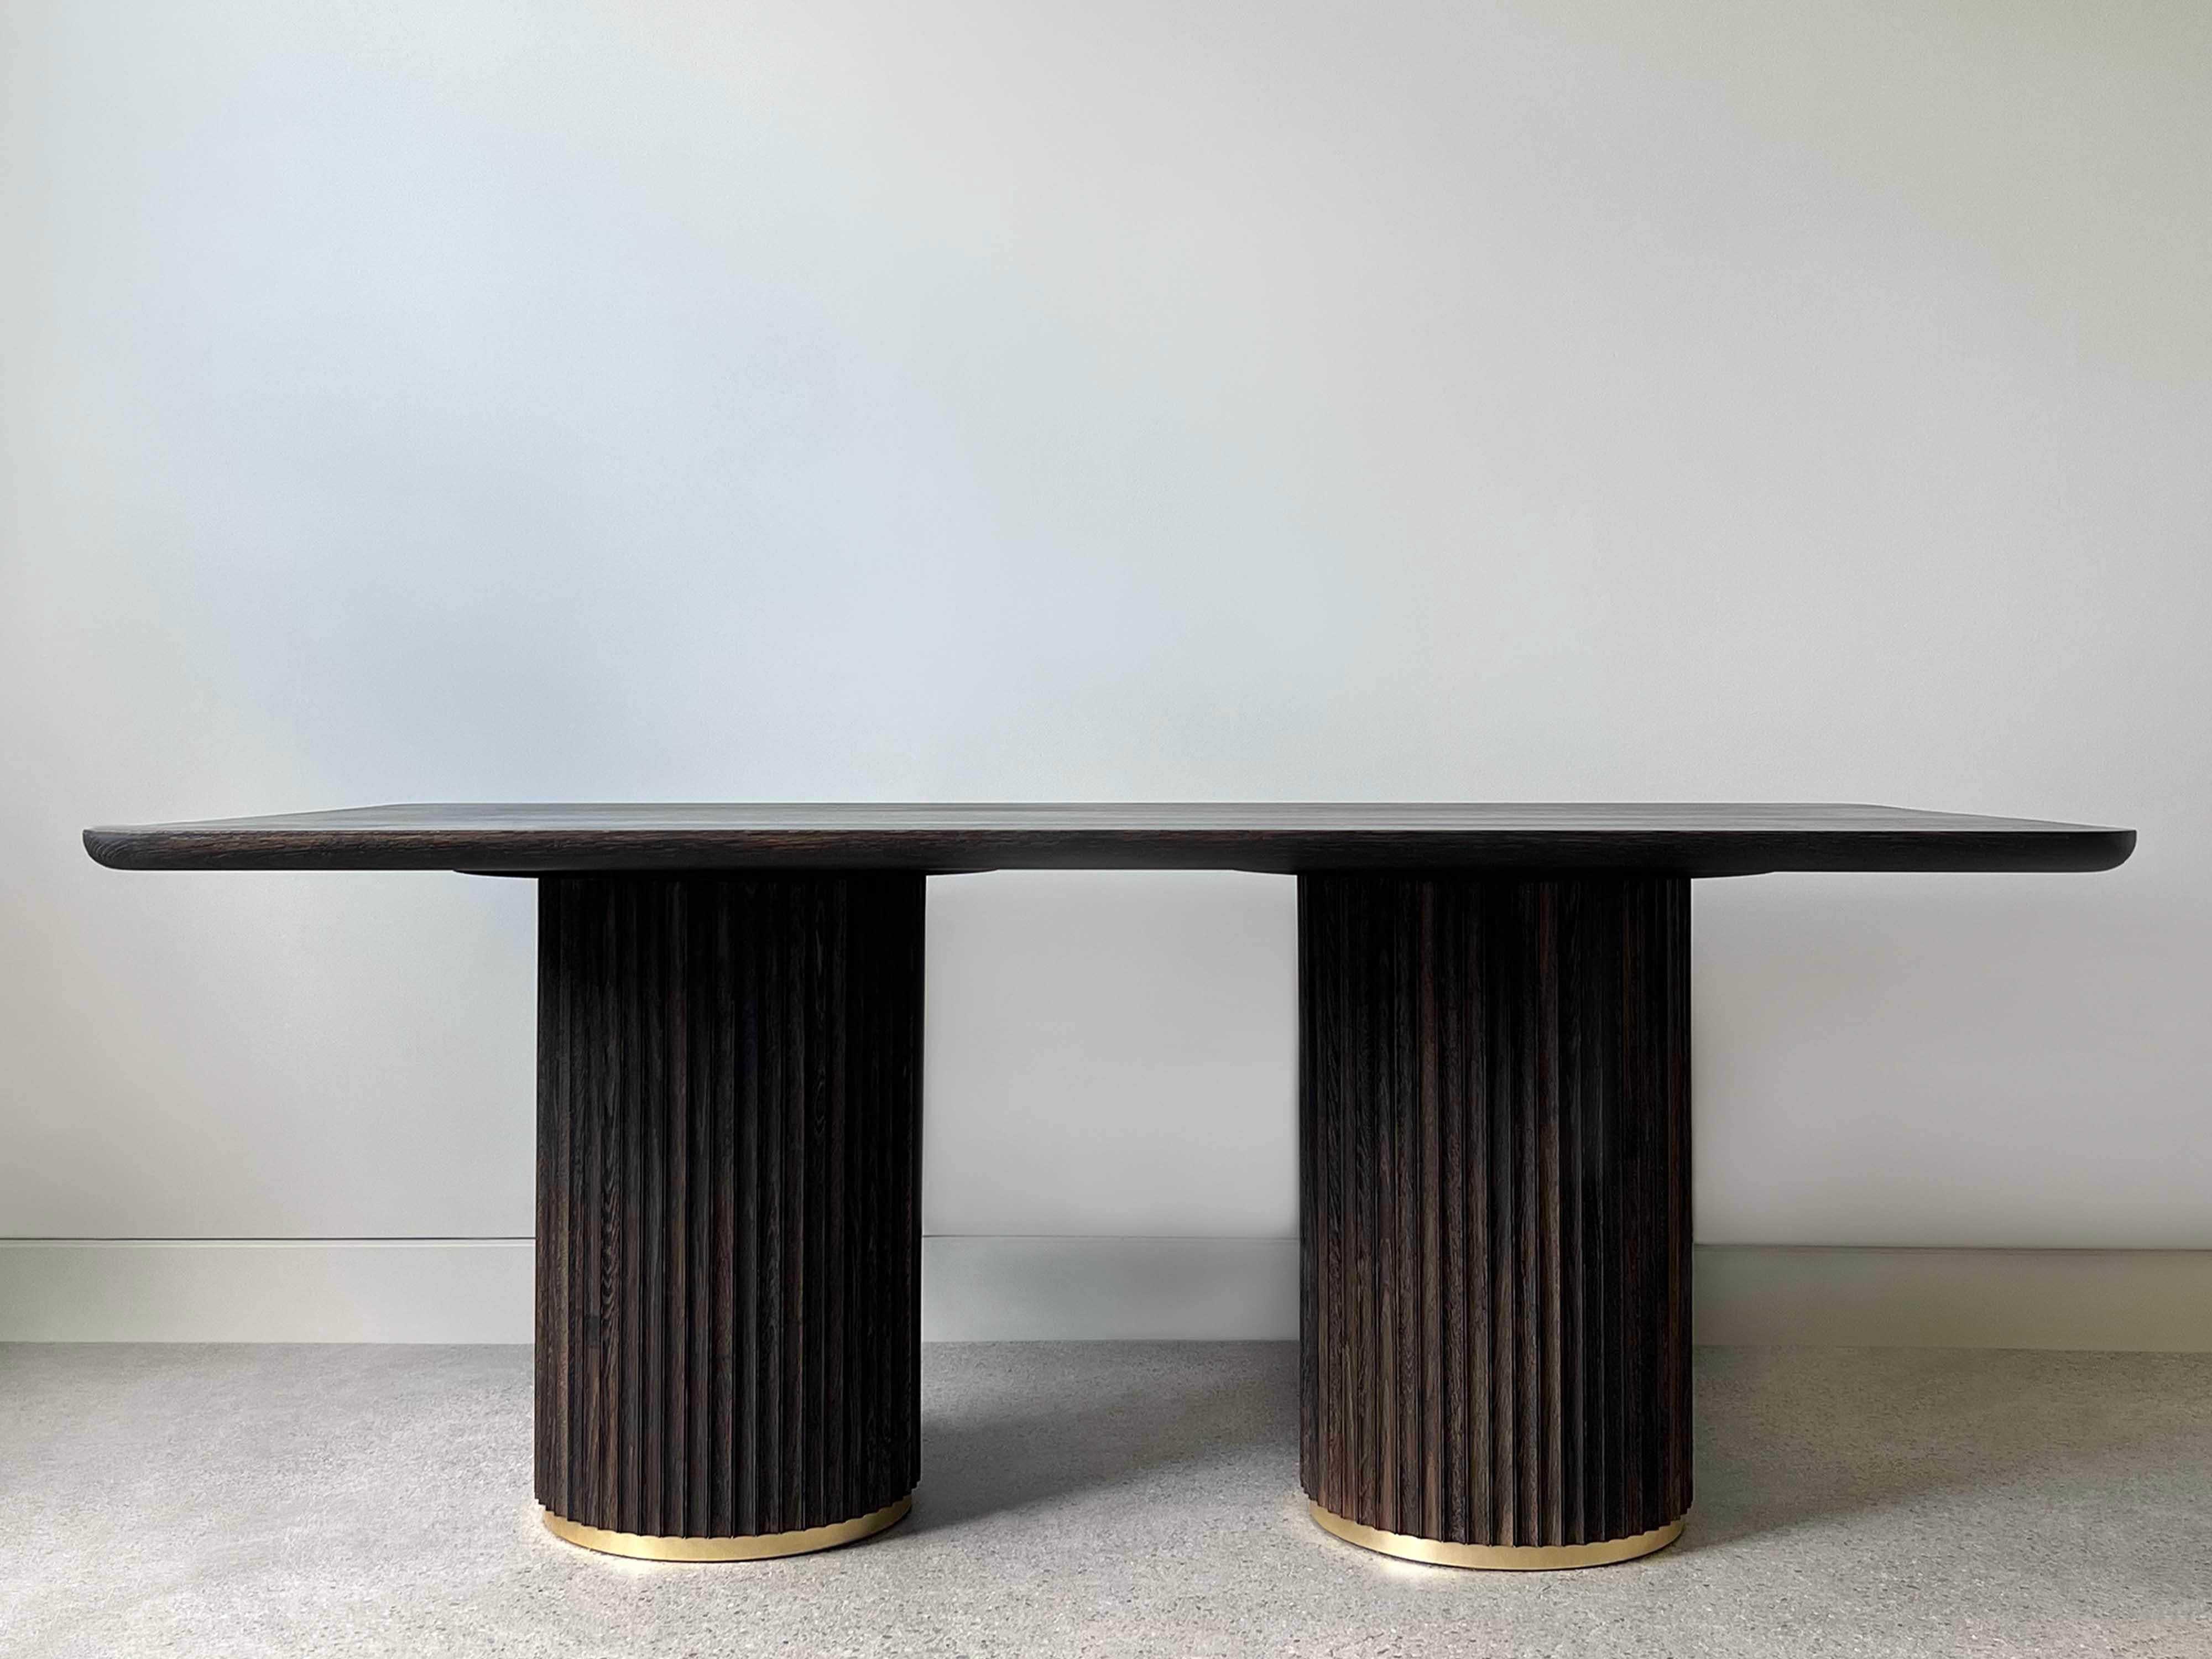 The Pilar Dining Table exudes a sense of subtle elegance and character in the space it inhabits. With a solid wood top and fluted double pedestal base, the table is plenty sturdy without looking heavy. The table seats six and has enough extra room